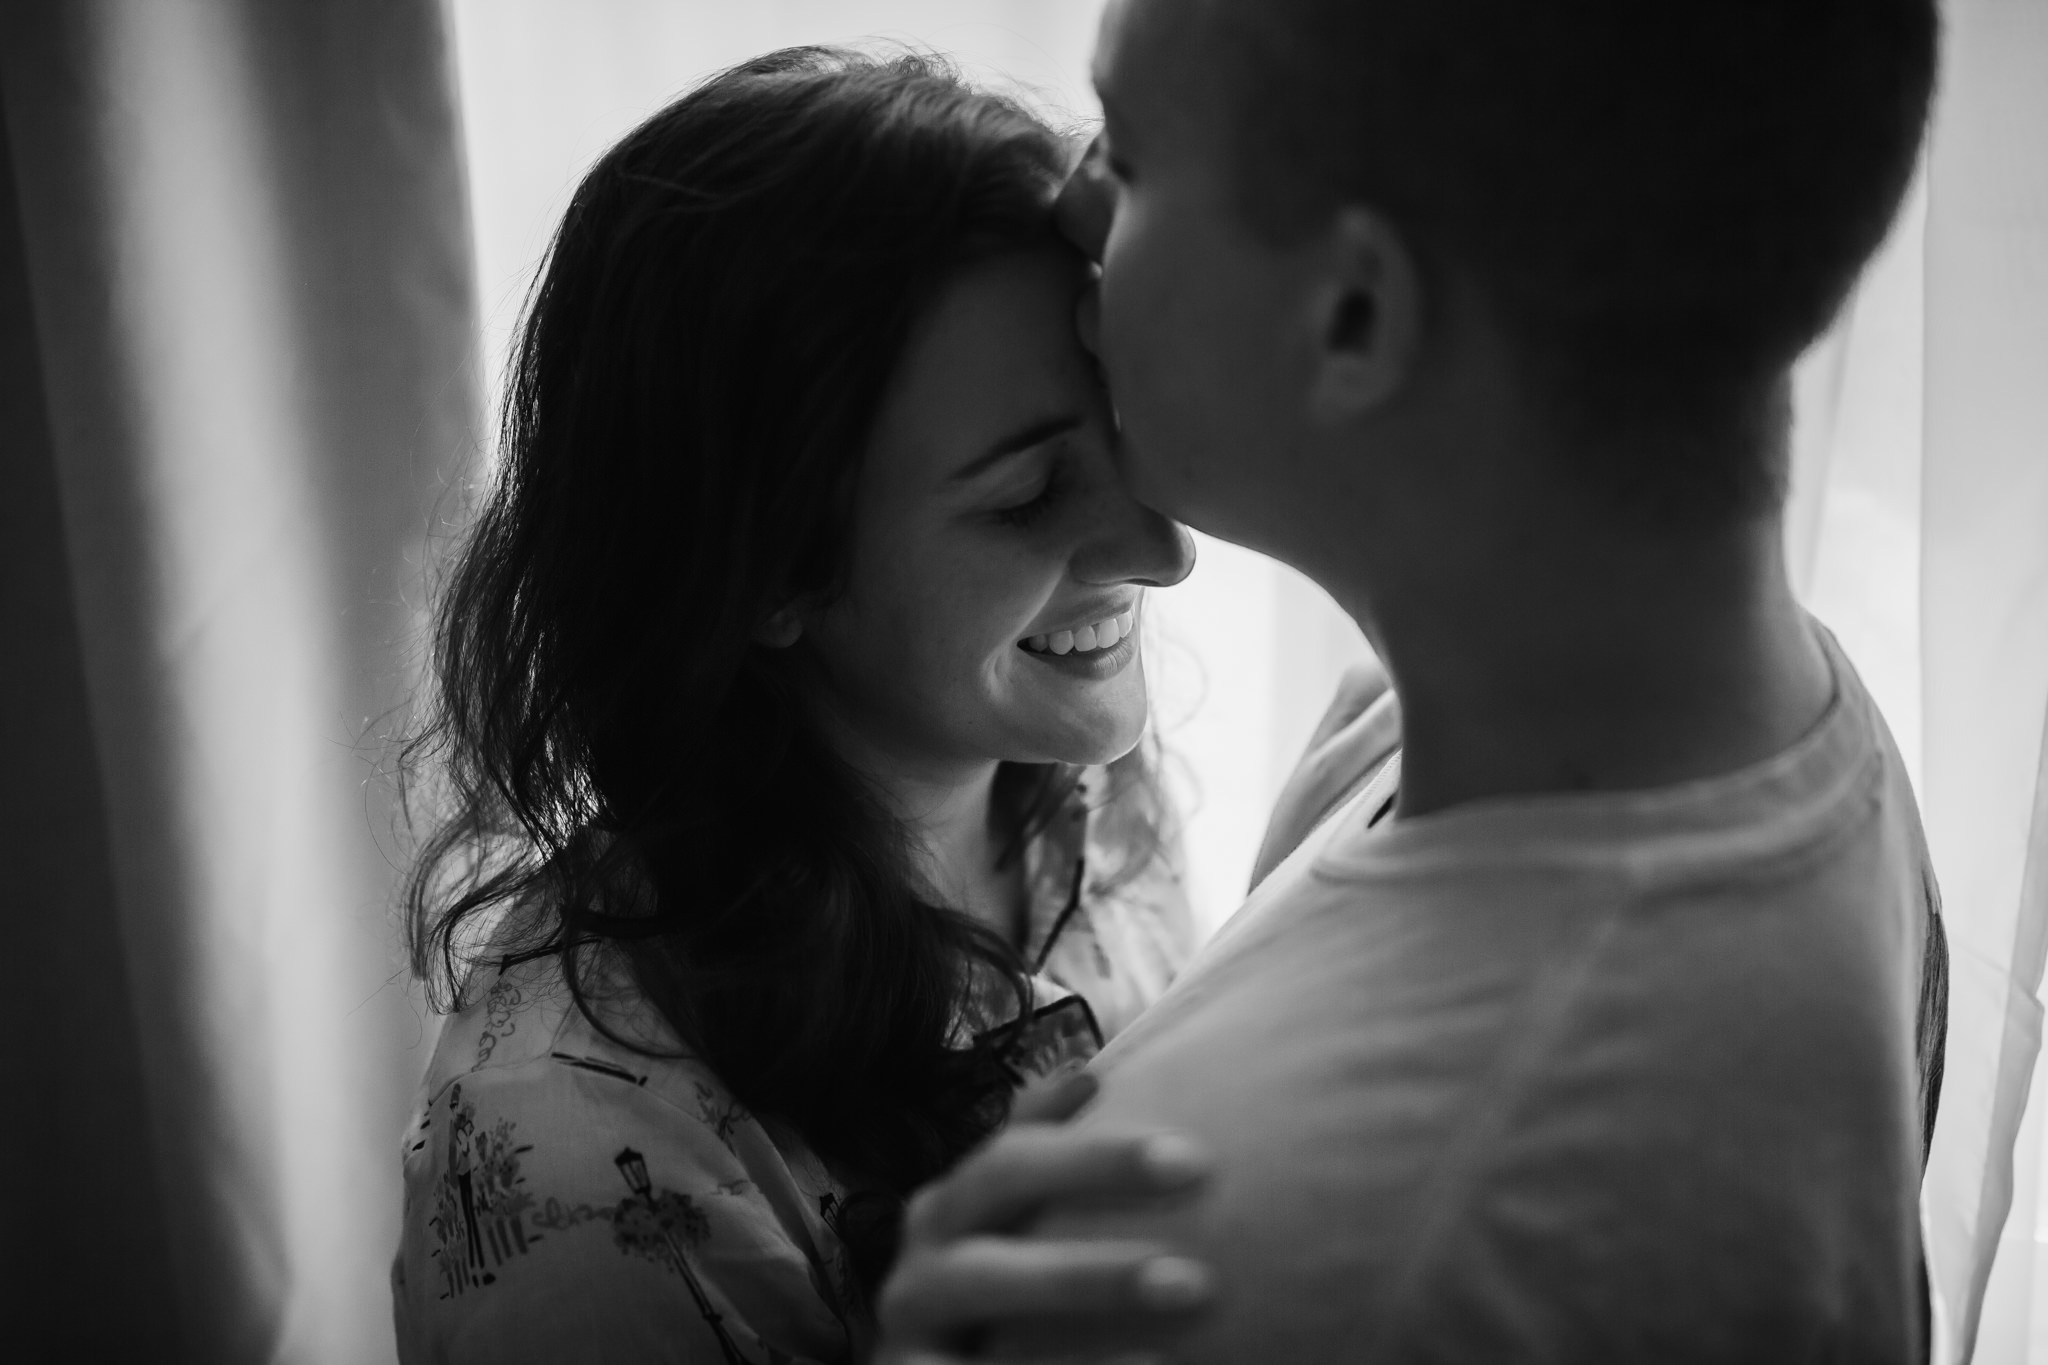 in-home-session-newlyweds-cassie-cook-photography-rosemary-beach-39.jpg